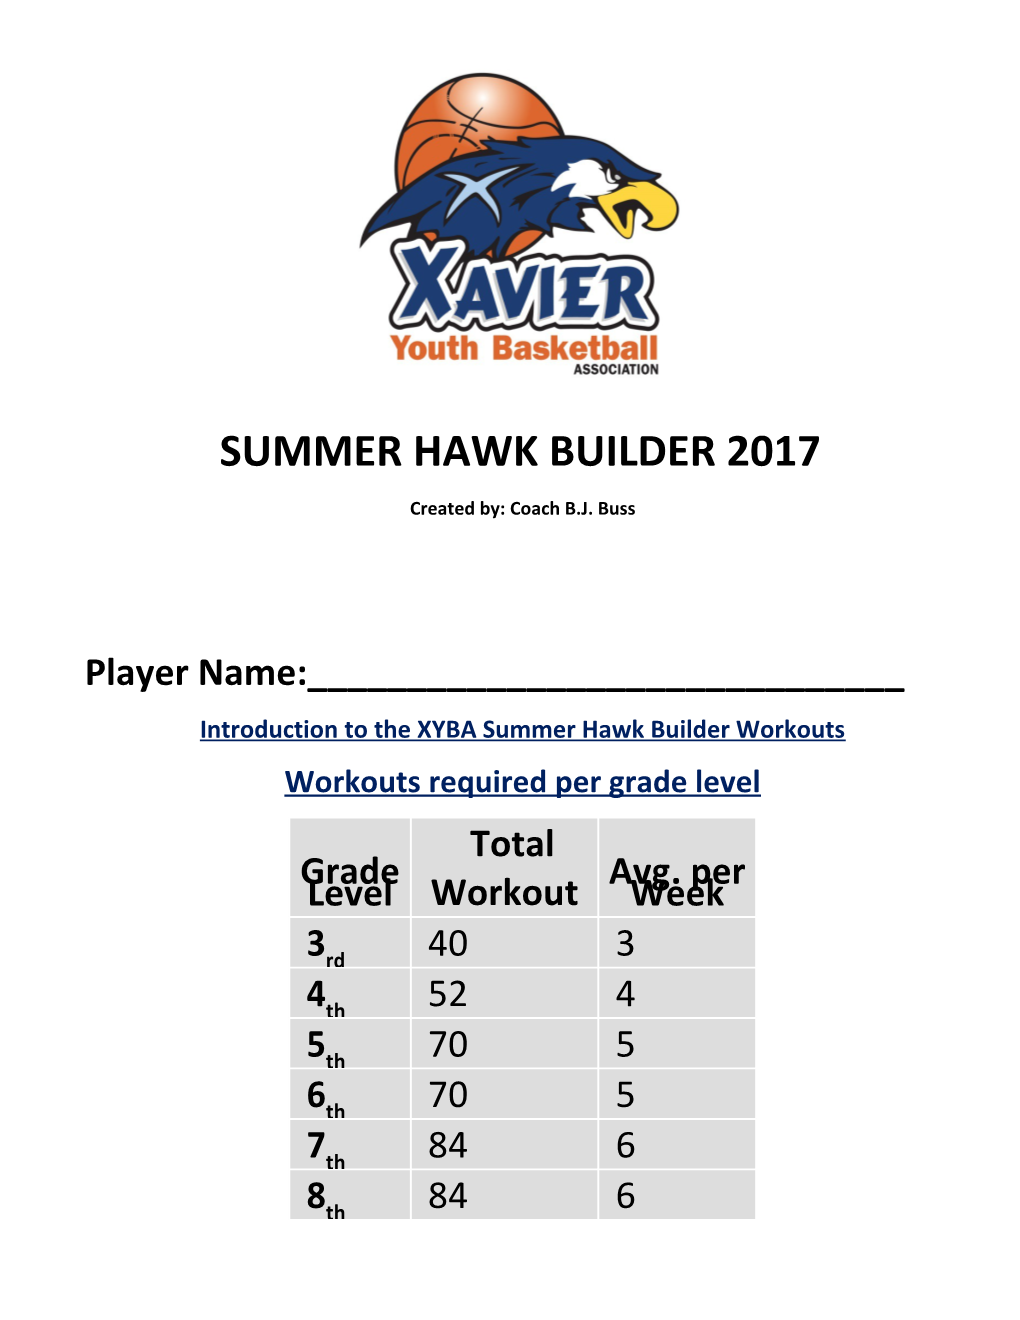 Introduction to the Xybasummer Hawk Builder Workouts